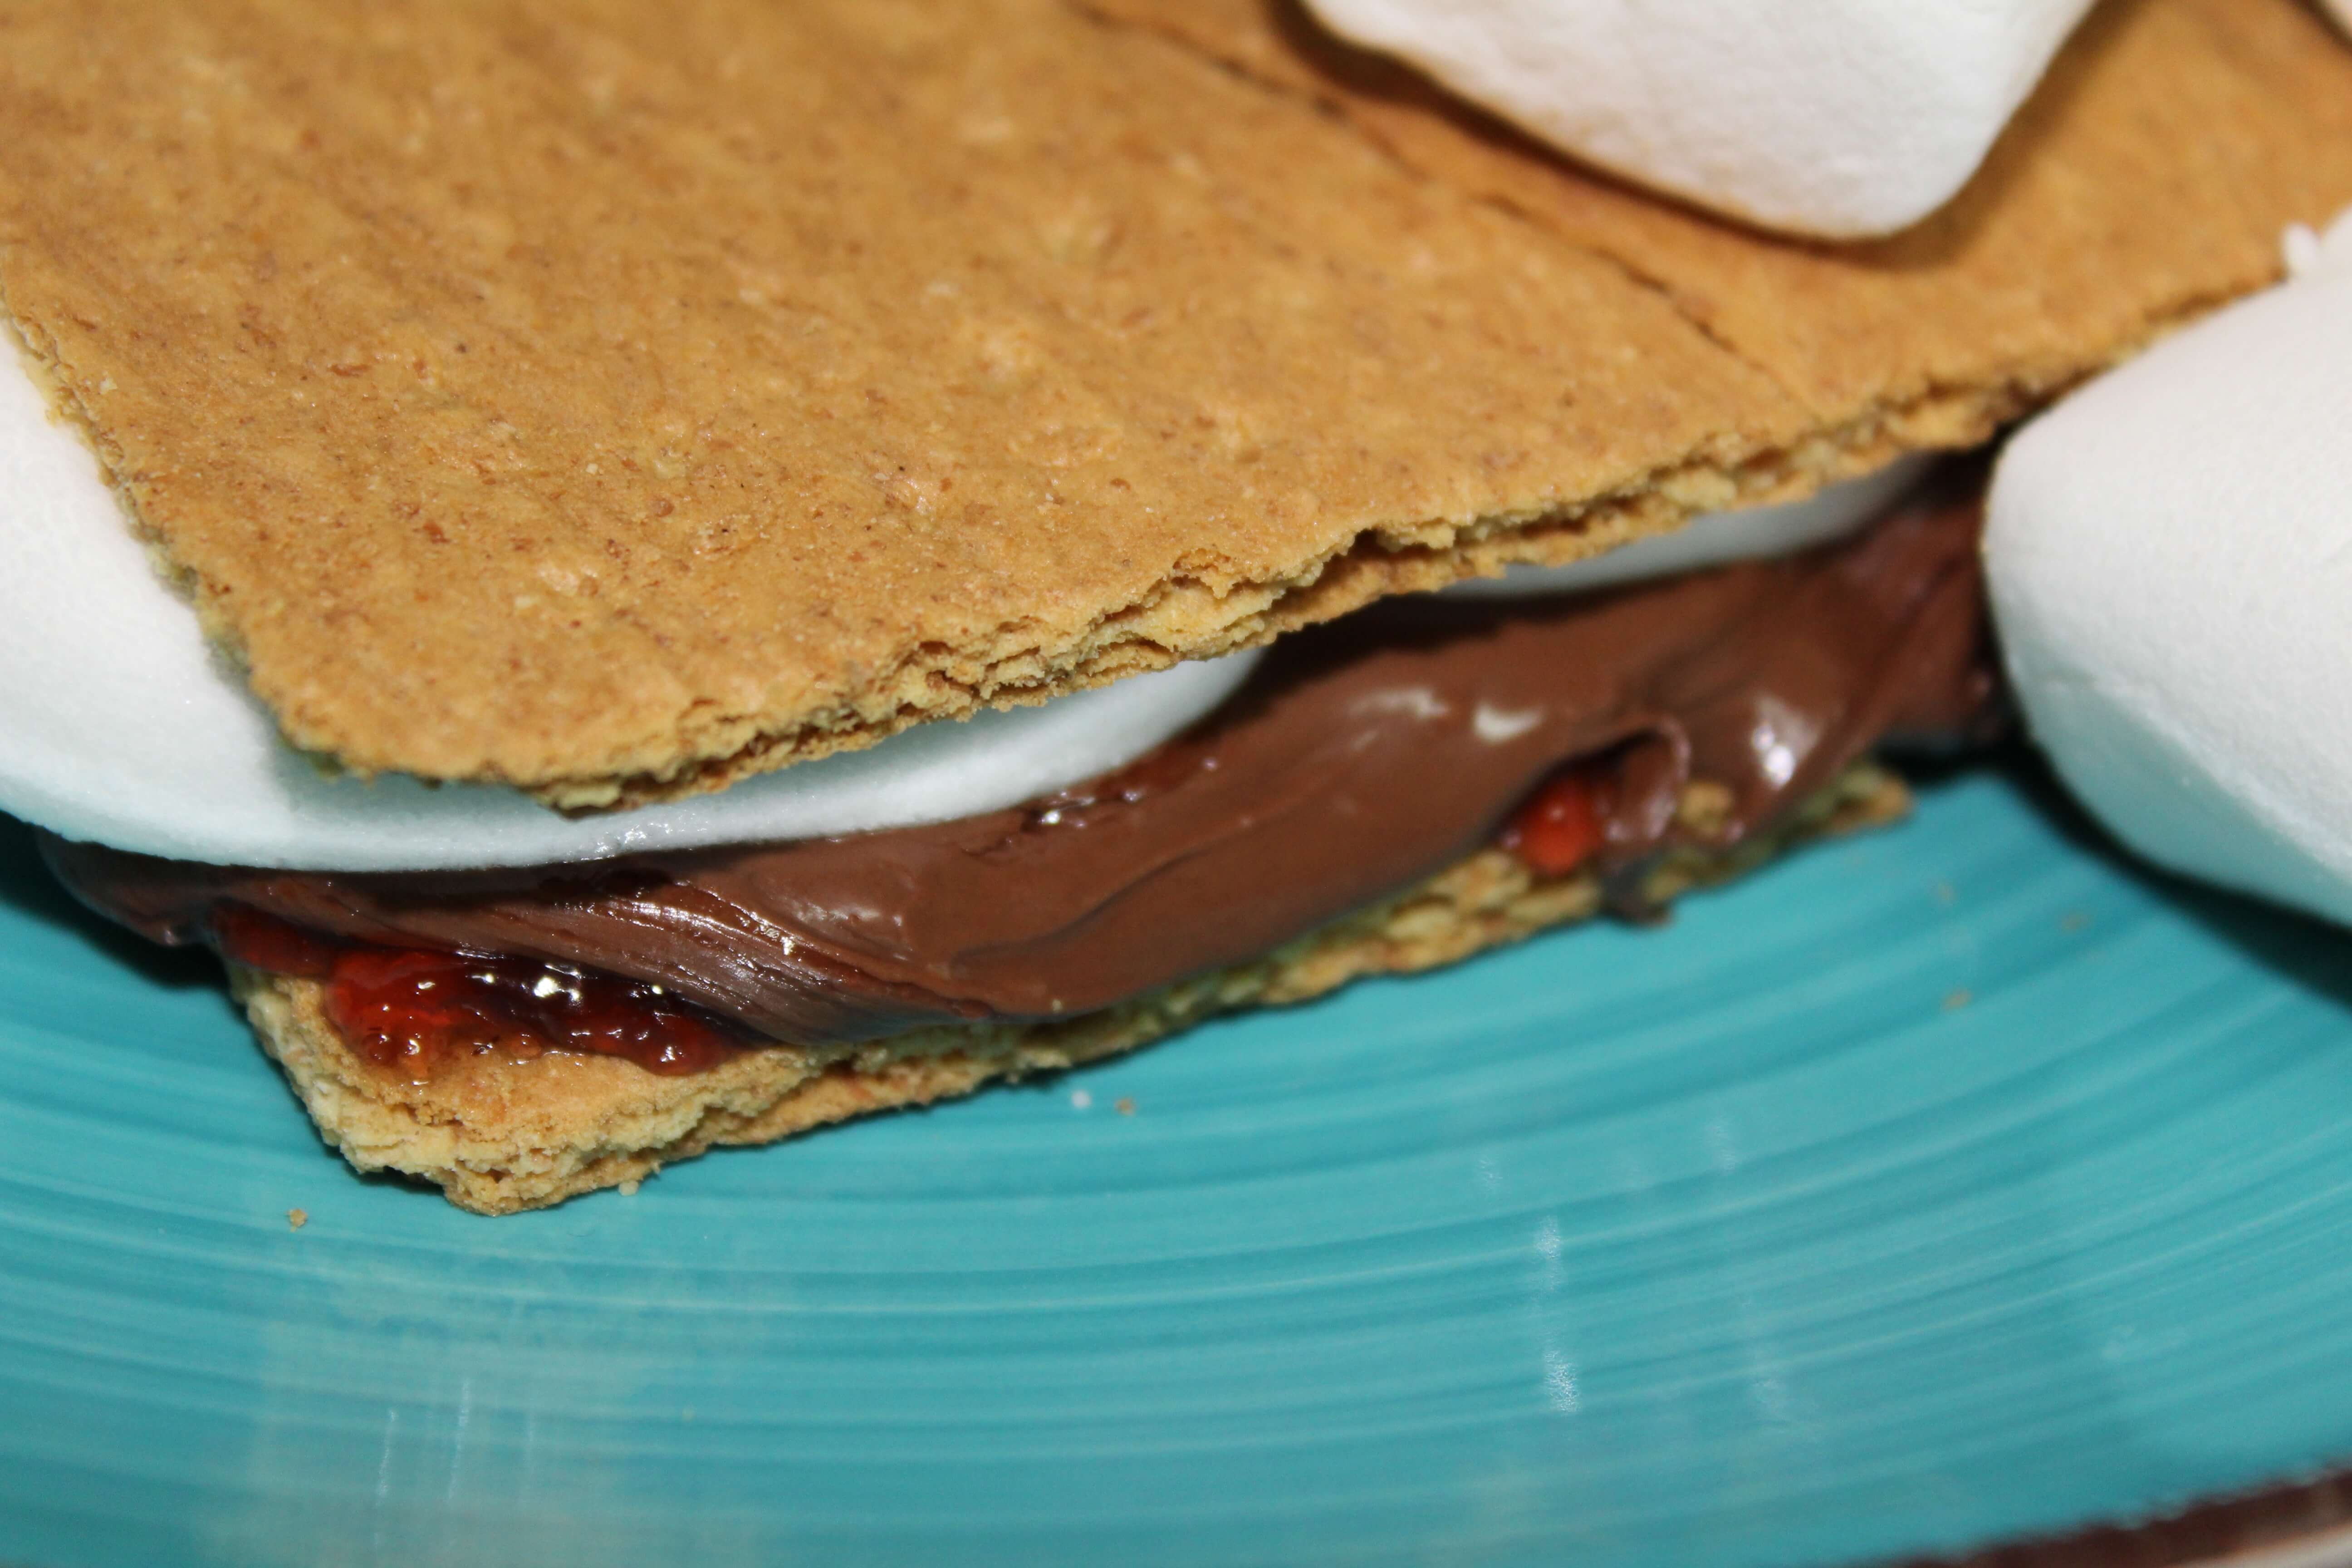 Strawberry Nutella S'mores! Get in my belly!